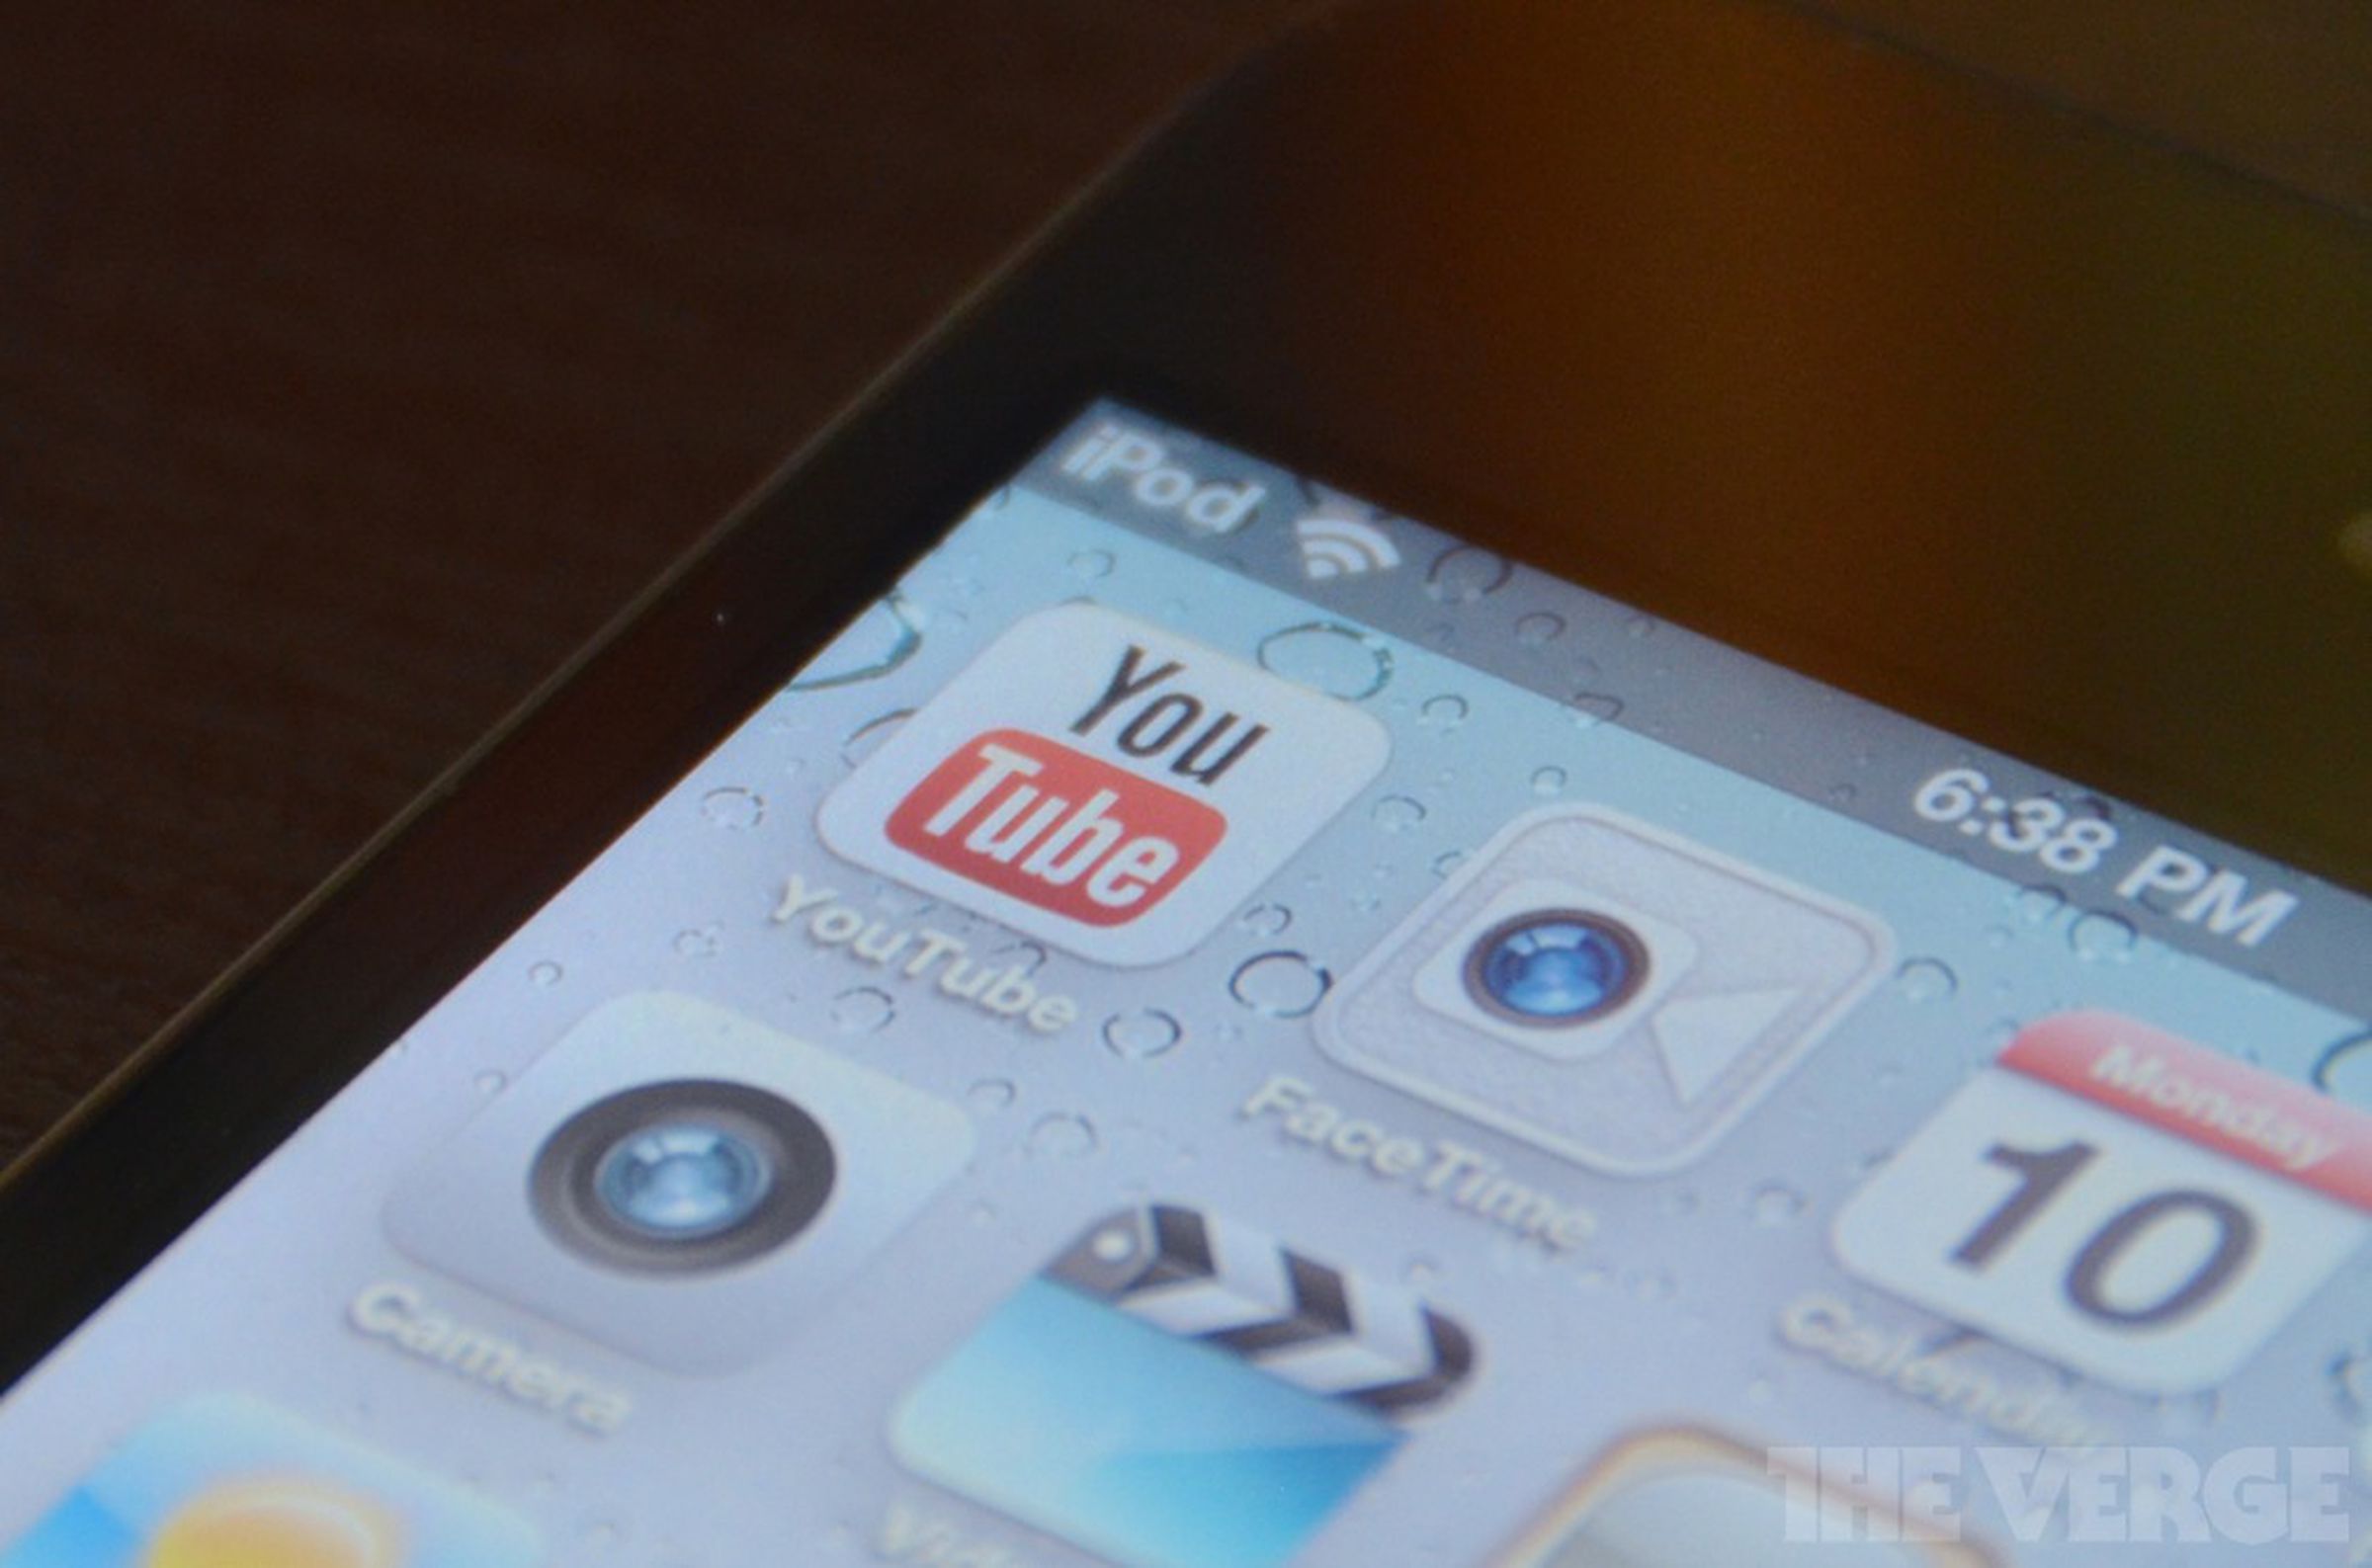 YouTube app for iPhone hands-on photos